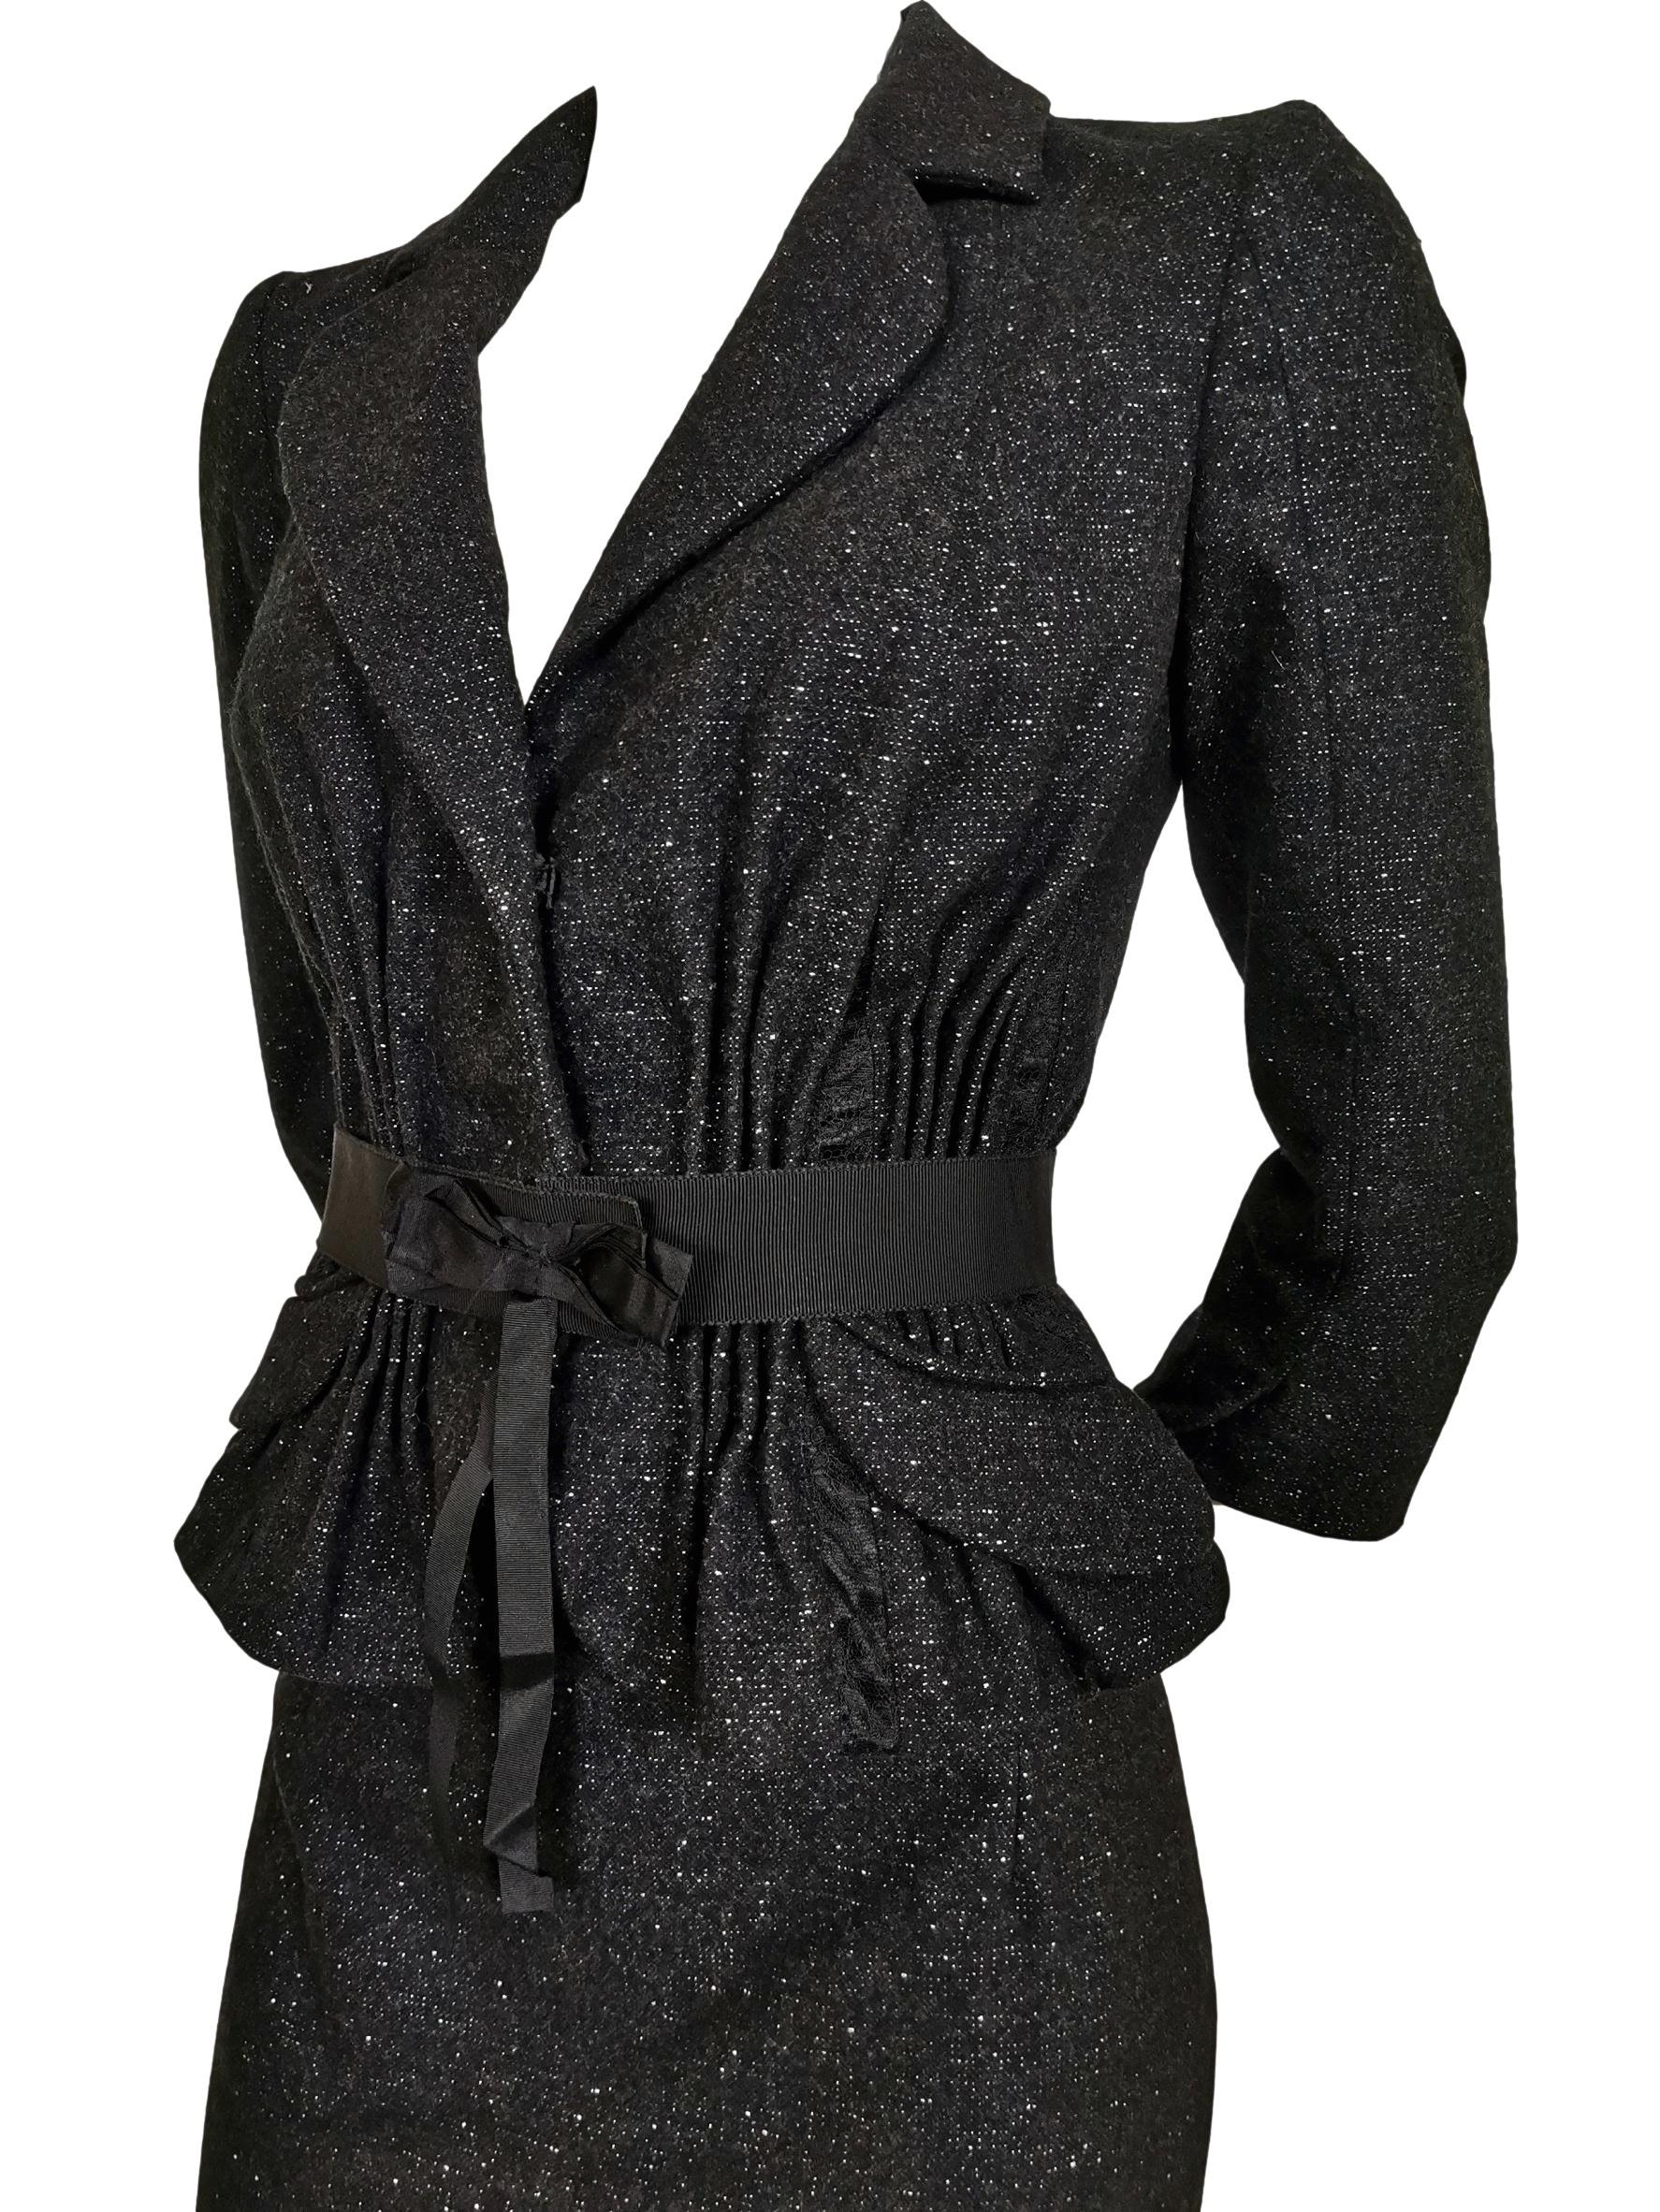 John Galliano Wool/Cashmere, Lace and Ribbon Skirt Suit A/W 2011 For Sale 12